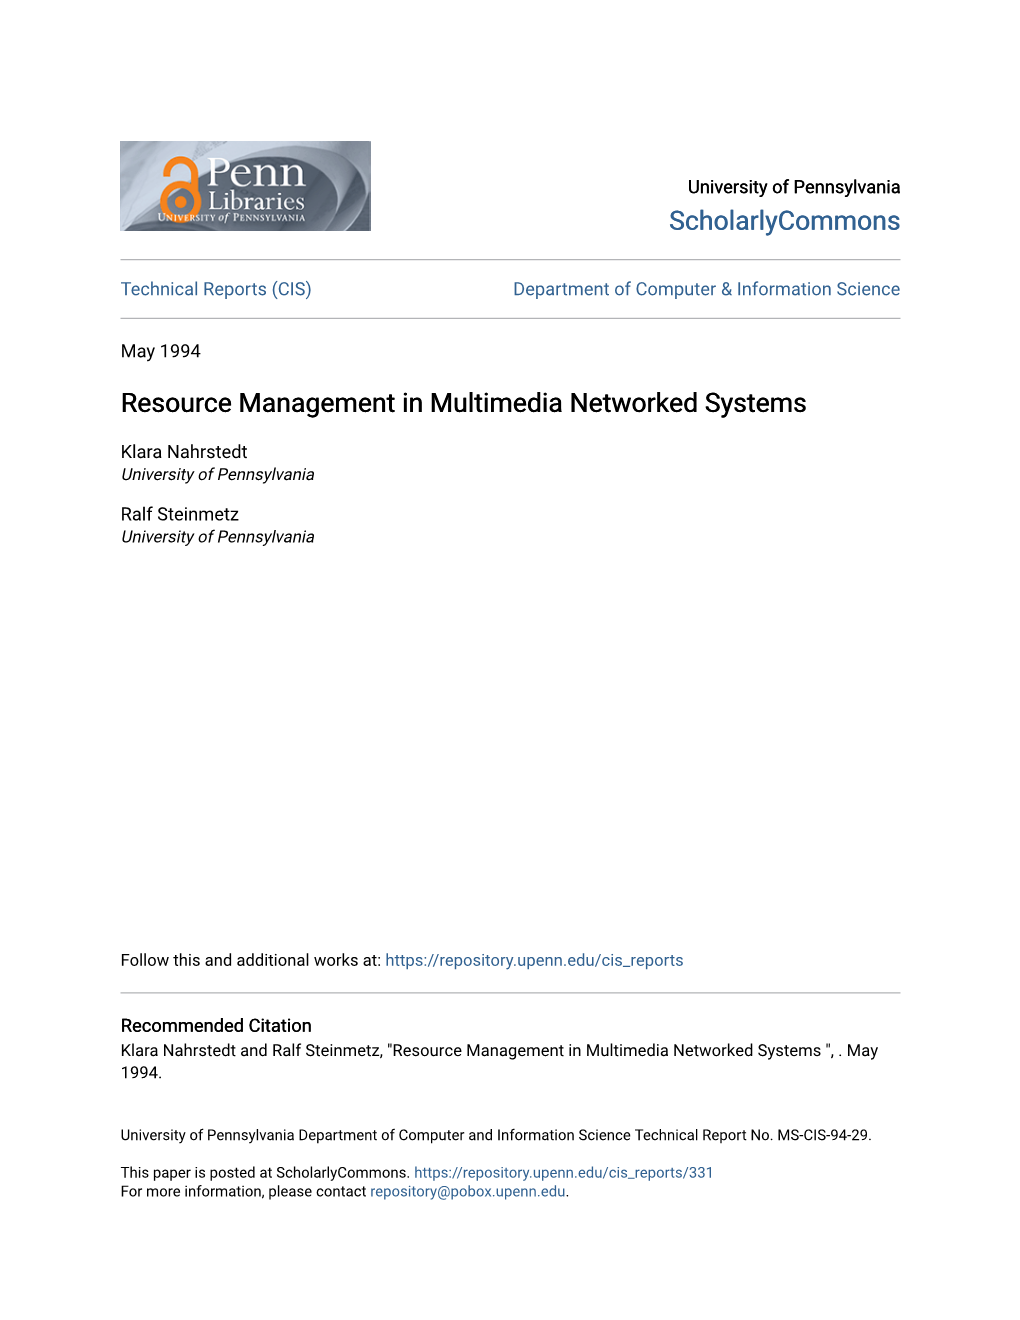 Resource Management in Multimedia Networked Systems